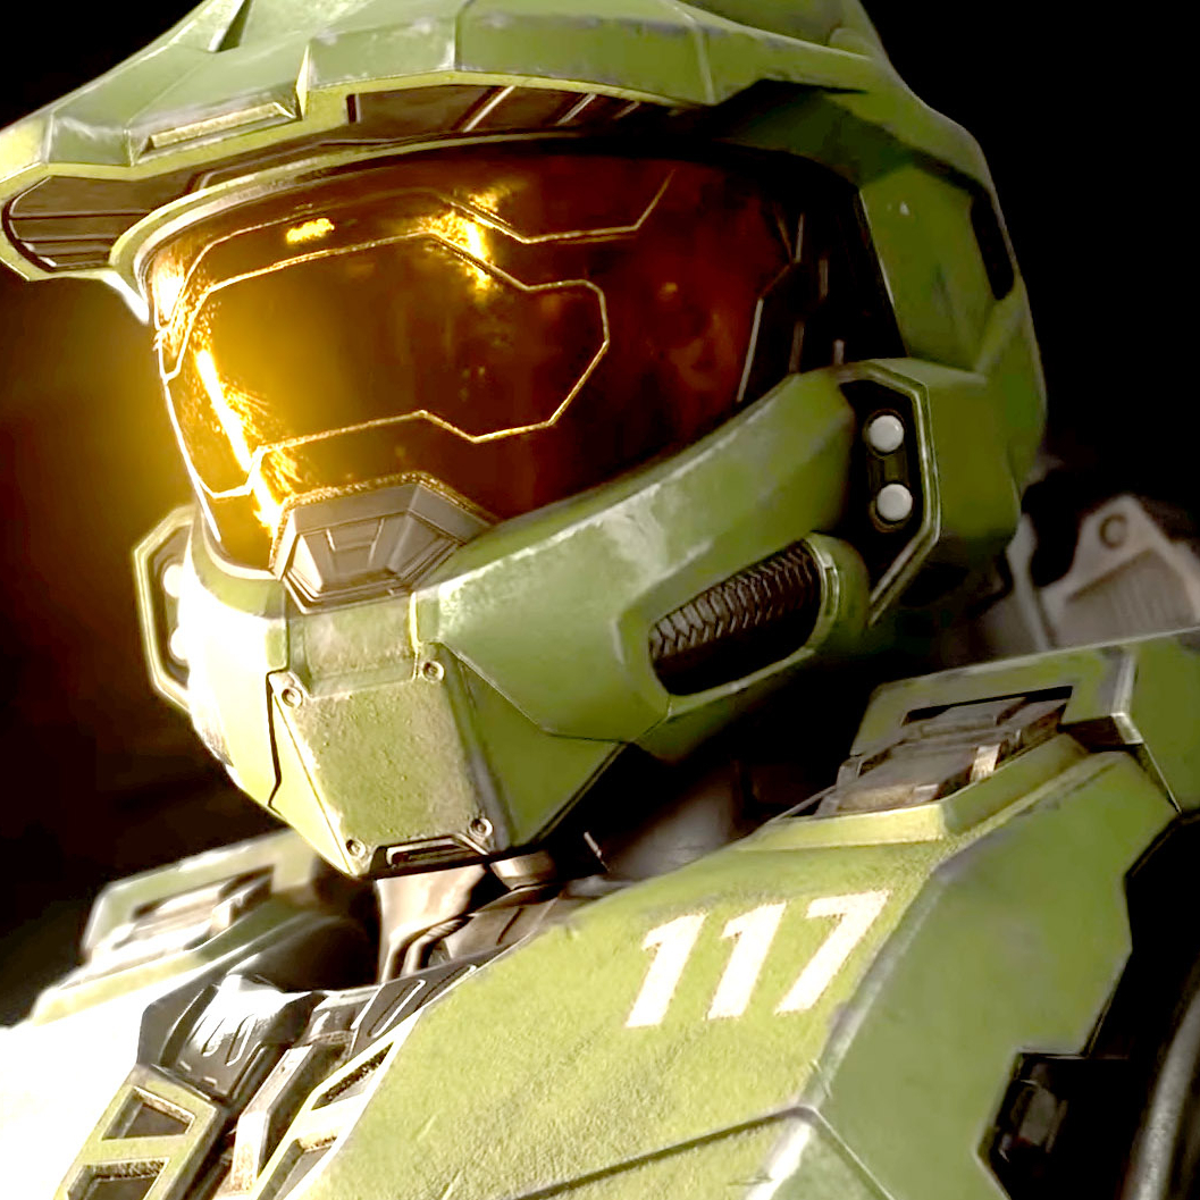 Master Chief's face revealed in Paramount's Halo TV series